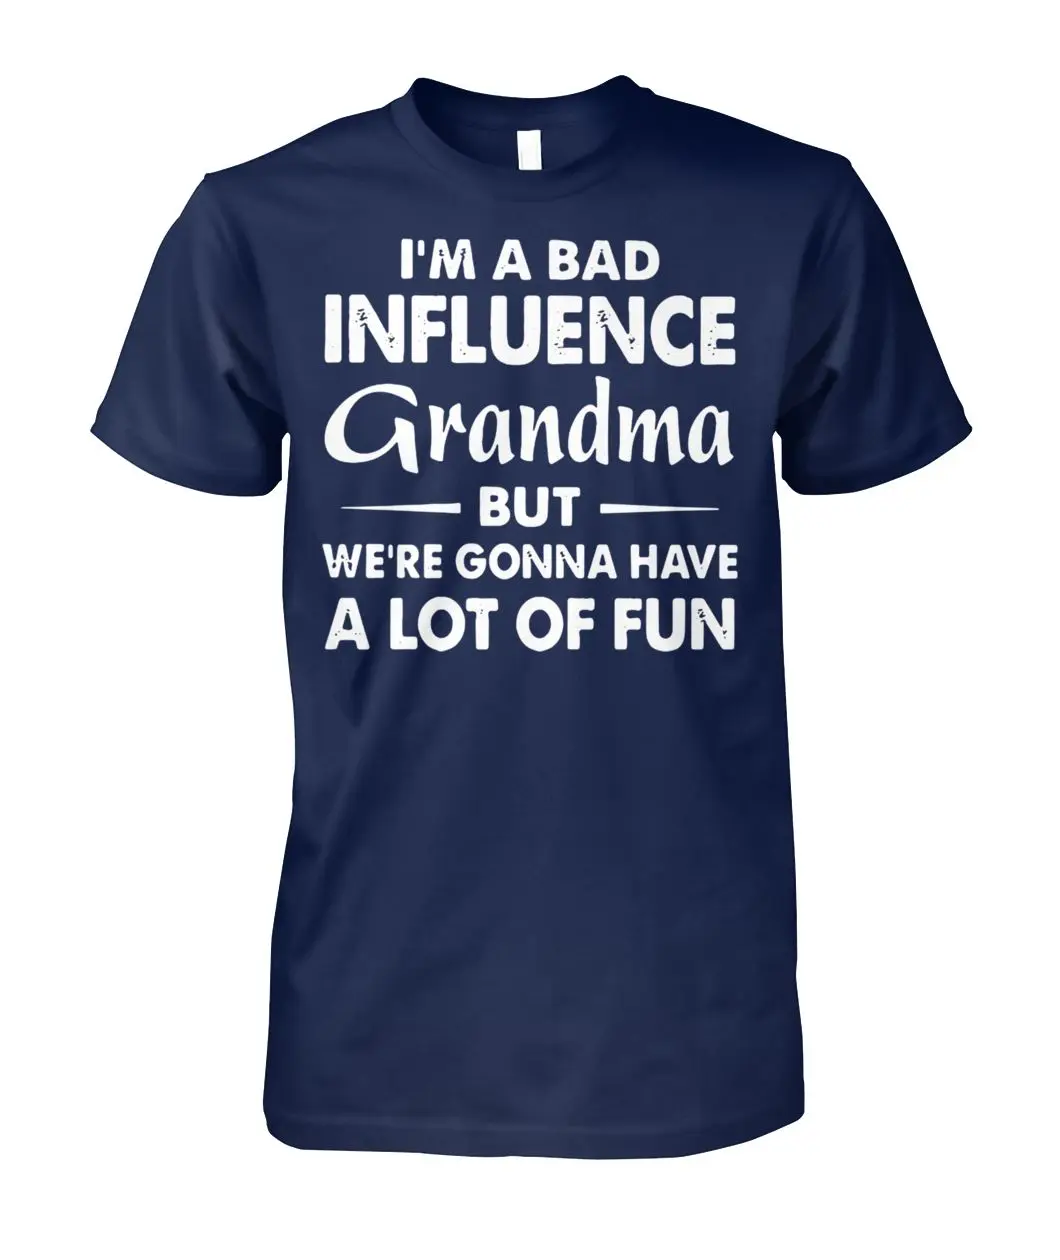 

Im A Bad Influence Grandma But We're Gonna Have A Lot of Fun. T-Shirt Summer Cotton Short Sleeve O-Neck Unisex T Shirt New S-3XL